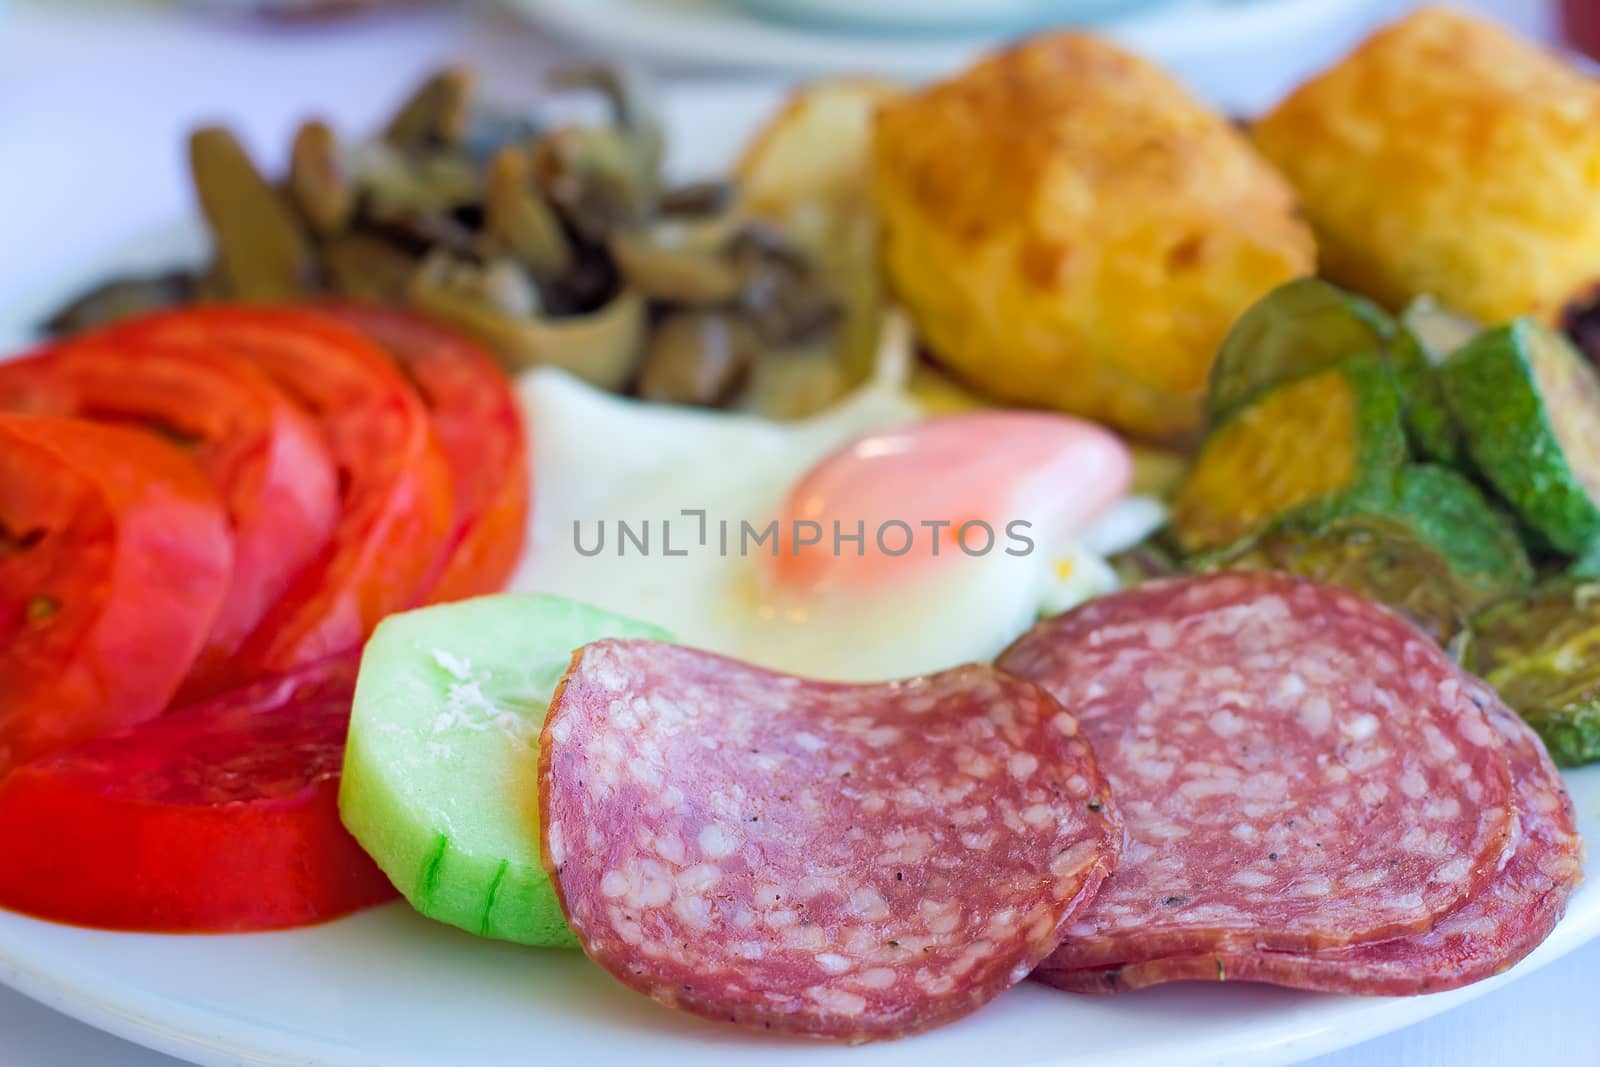 Sliced delicious slices of sausage and scrambled eggs with tomatoes and grilled zucchini on the plate on the table.